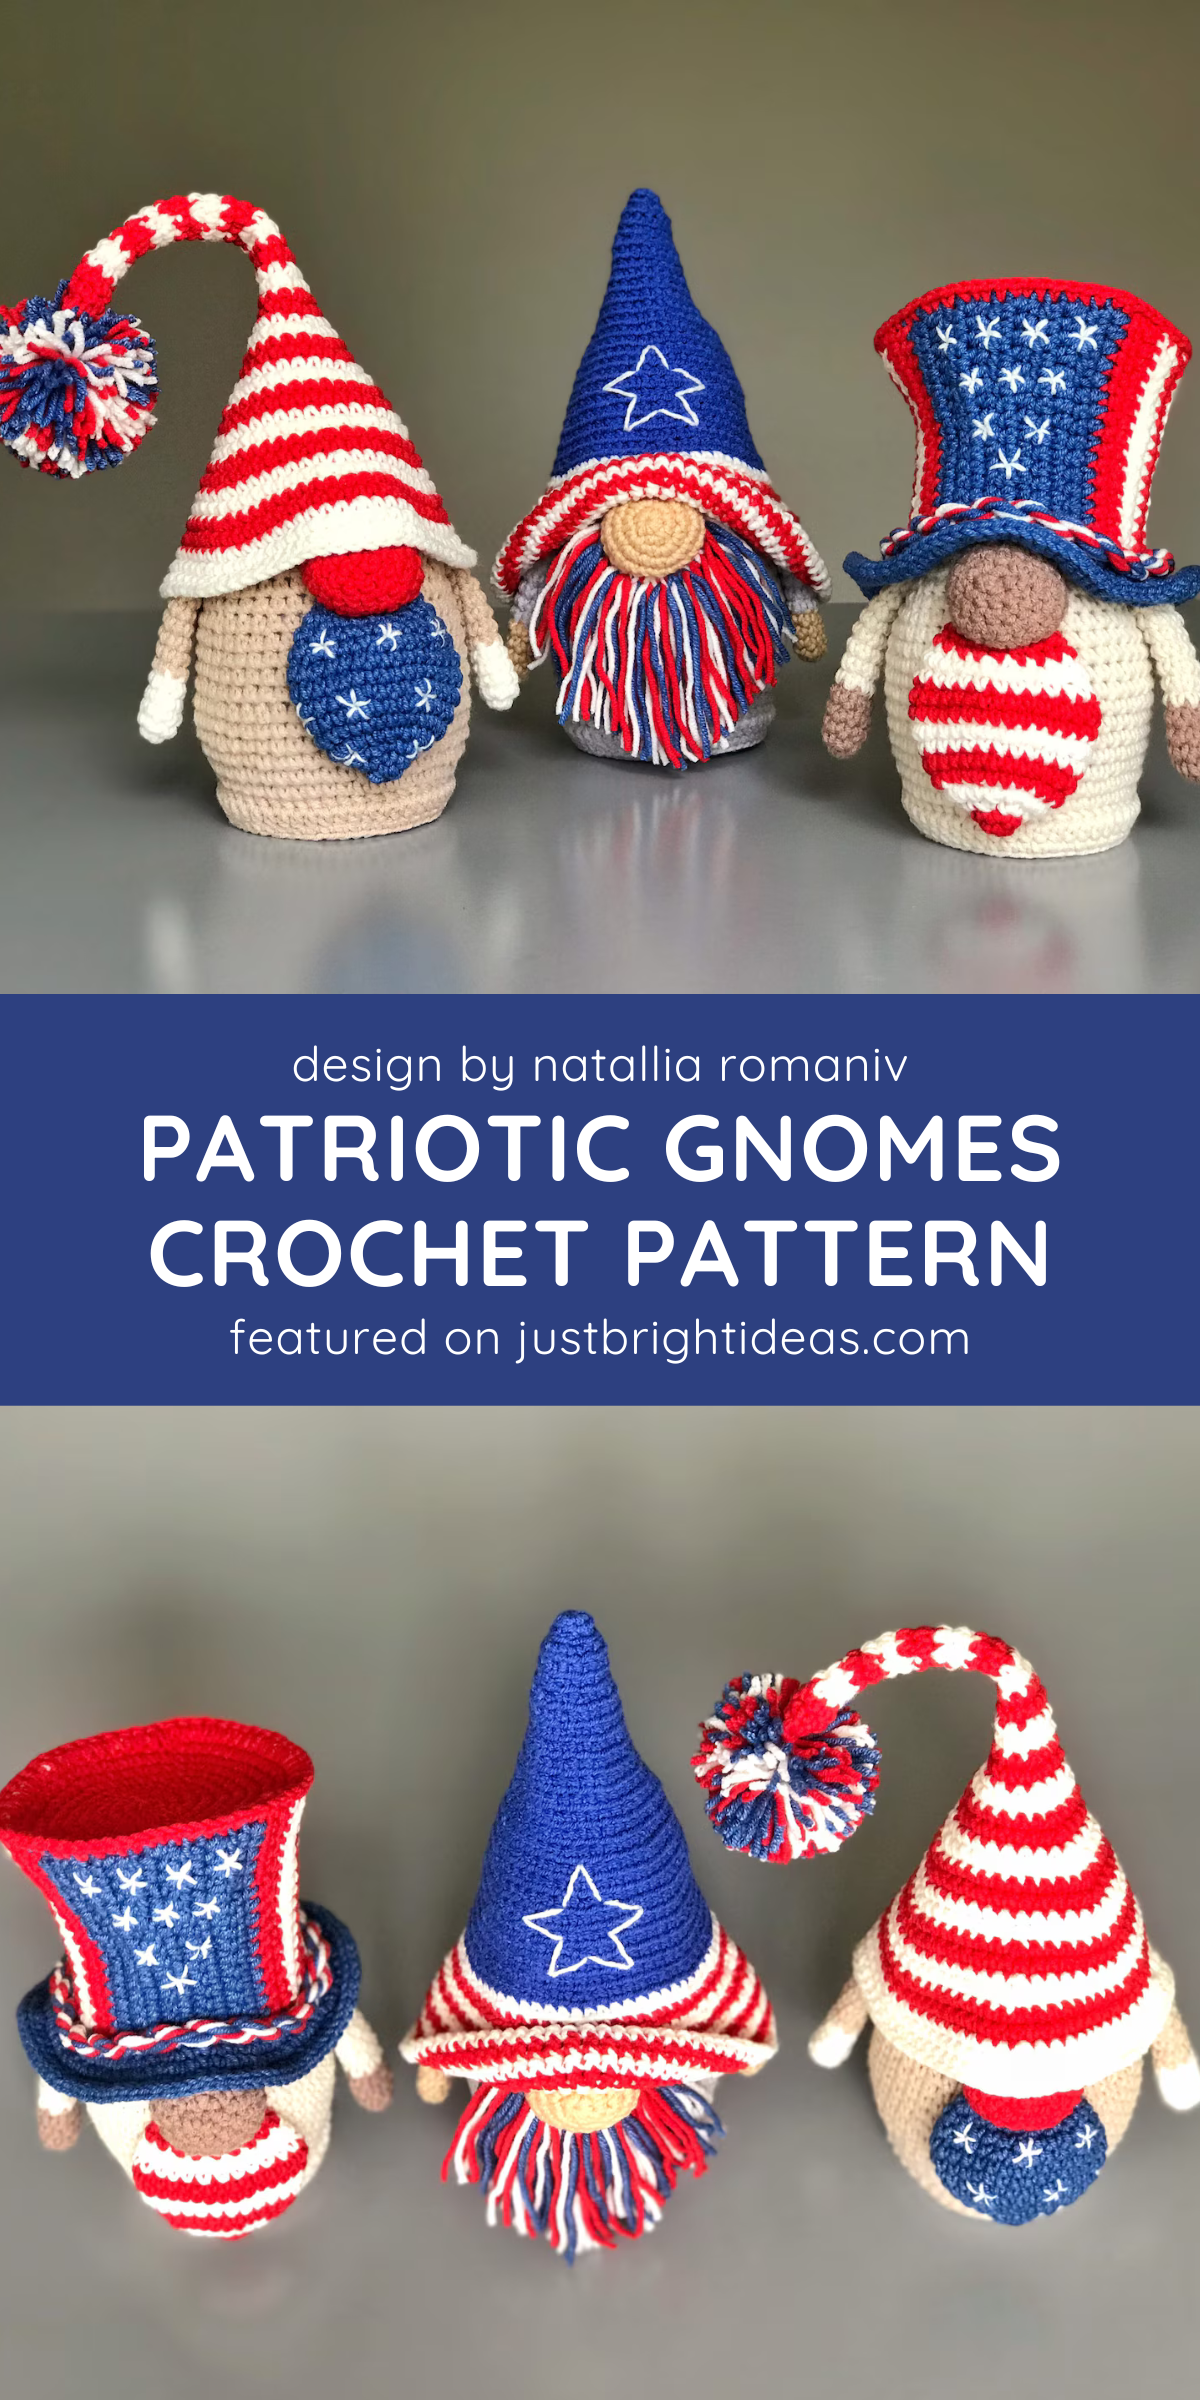 🇺🇸👀 "These three adorable gnomes are ready to bring some patriotic charm to your home! Dressed in red, white, and blue, they're the perfect festive decor." 🎨✨
📲 See the post for the pattern details! 🔗